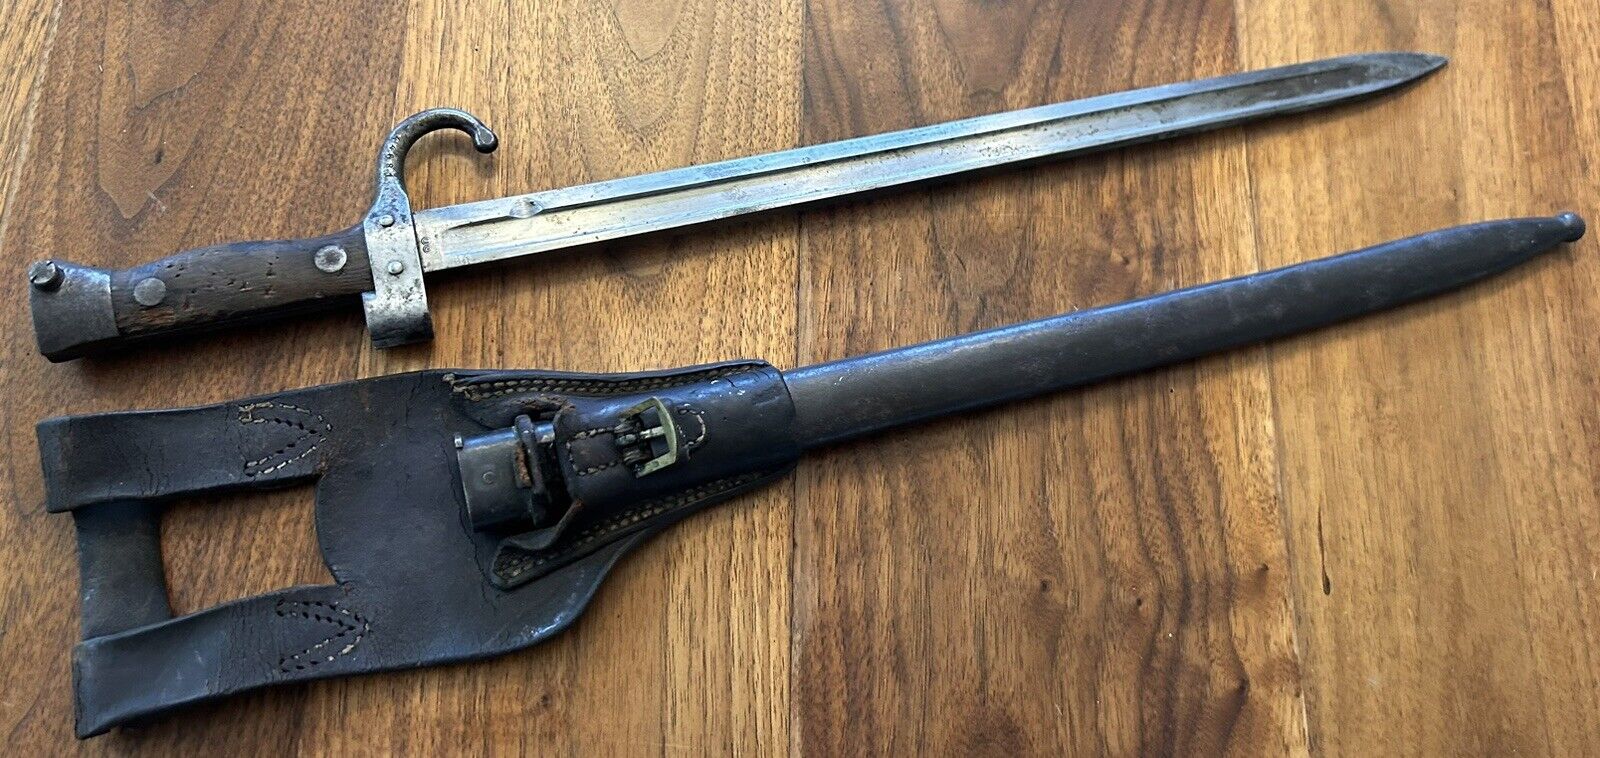 PRE WWI-FRENCH M1892 BERTHIER BAYONET WITH SCABBARD AND LEATHER FROG